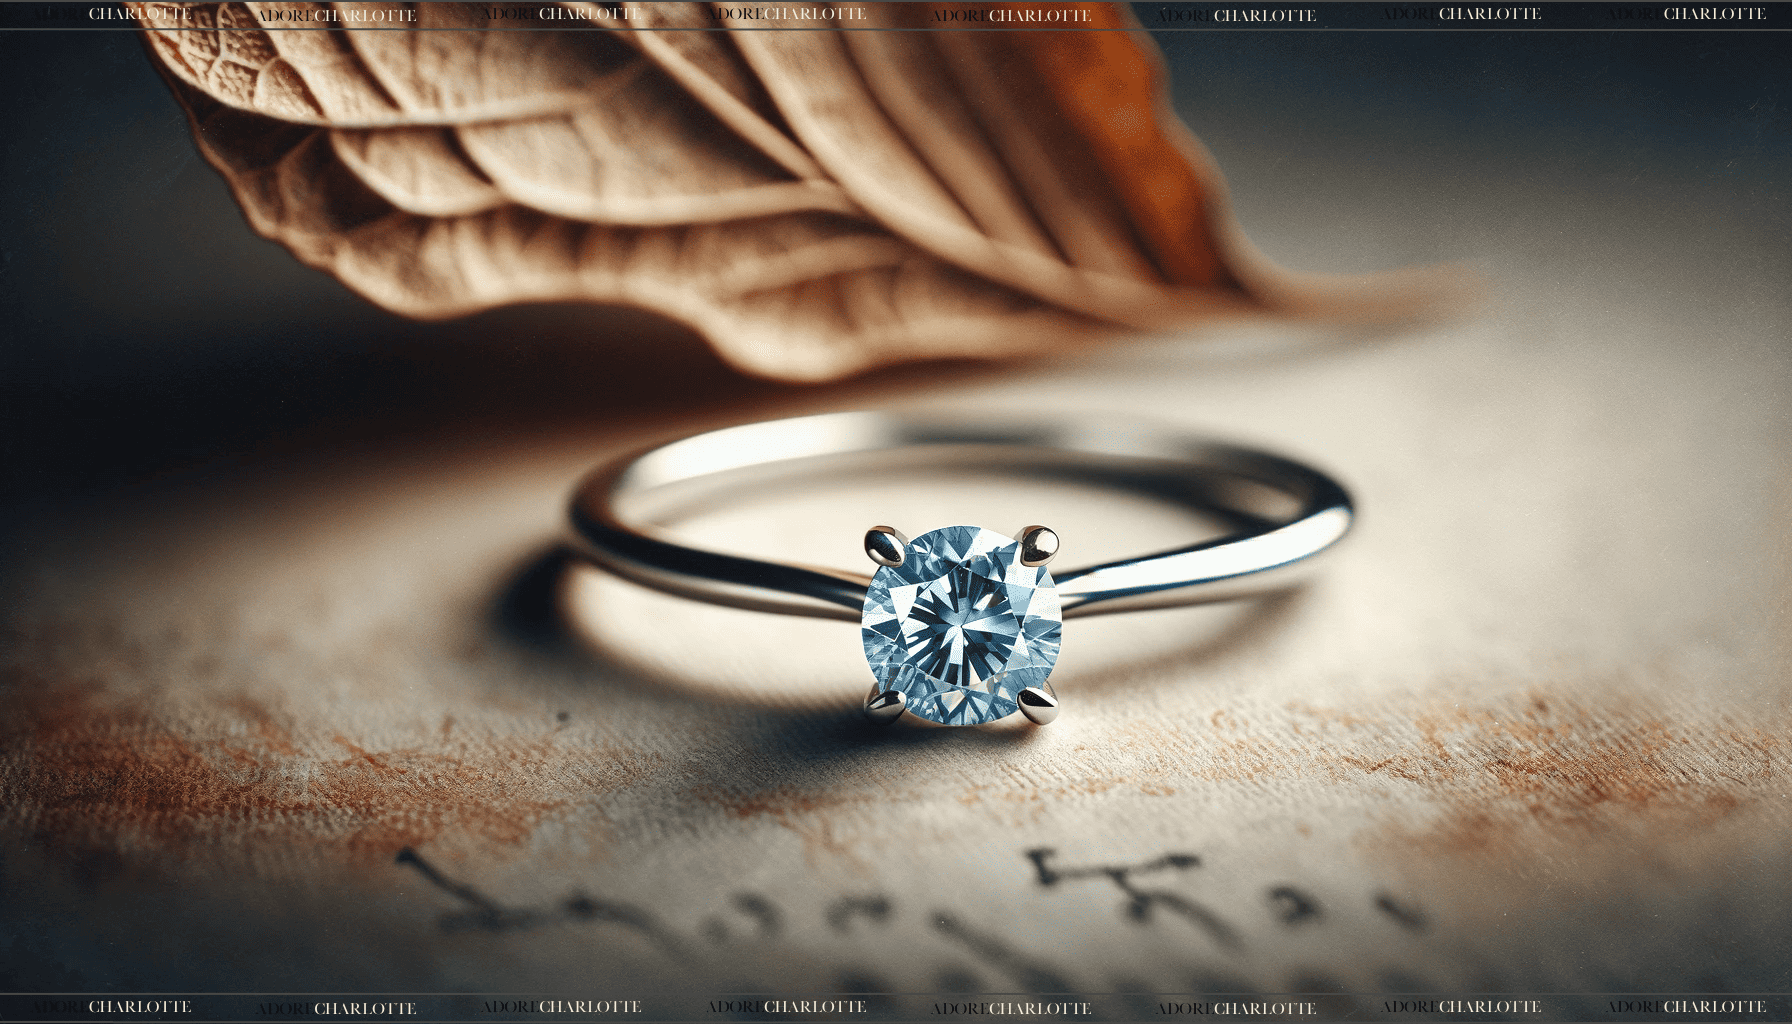 Artistic representation of a Classic Solitaire Blue Diamond Ring. The ring showcases a stunning blue diamond set in a minimalist solitaire design. The diamond's unique beauty is emphasized against a contrasting, textured background, highlighting the ring's simplicity and sophisticated elegance.